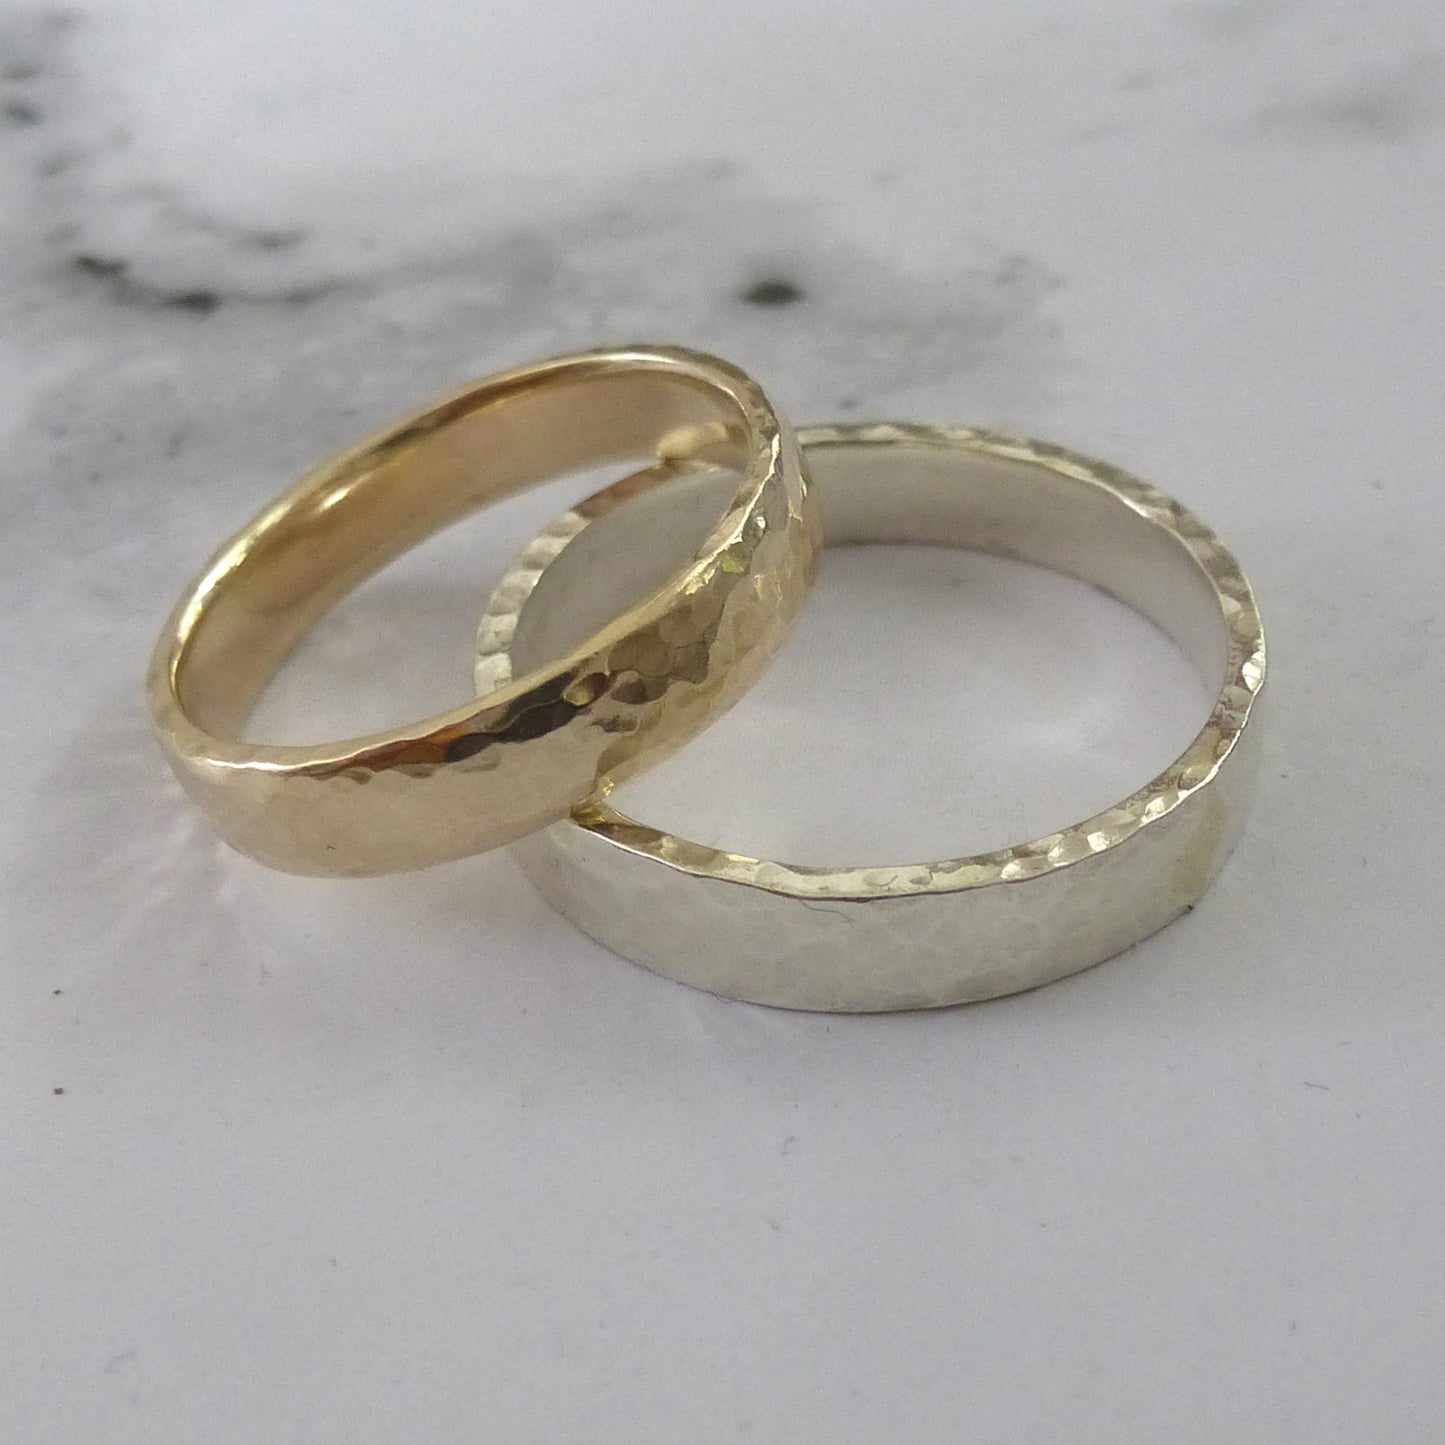 A pair of hammered wedding rings, 4mm, recycled gold. Top band in yellow with soft edges, lower band 9ct white gold, square edges